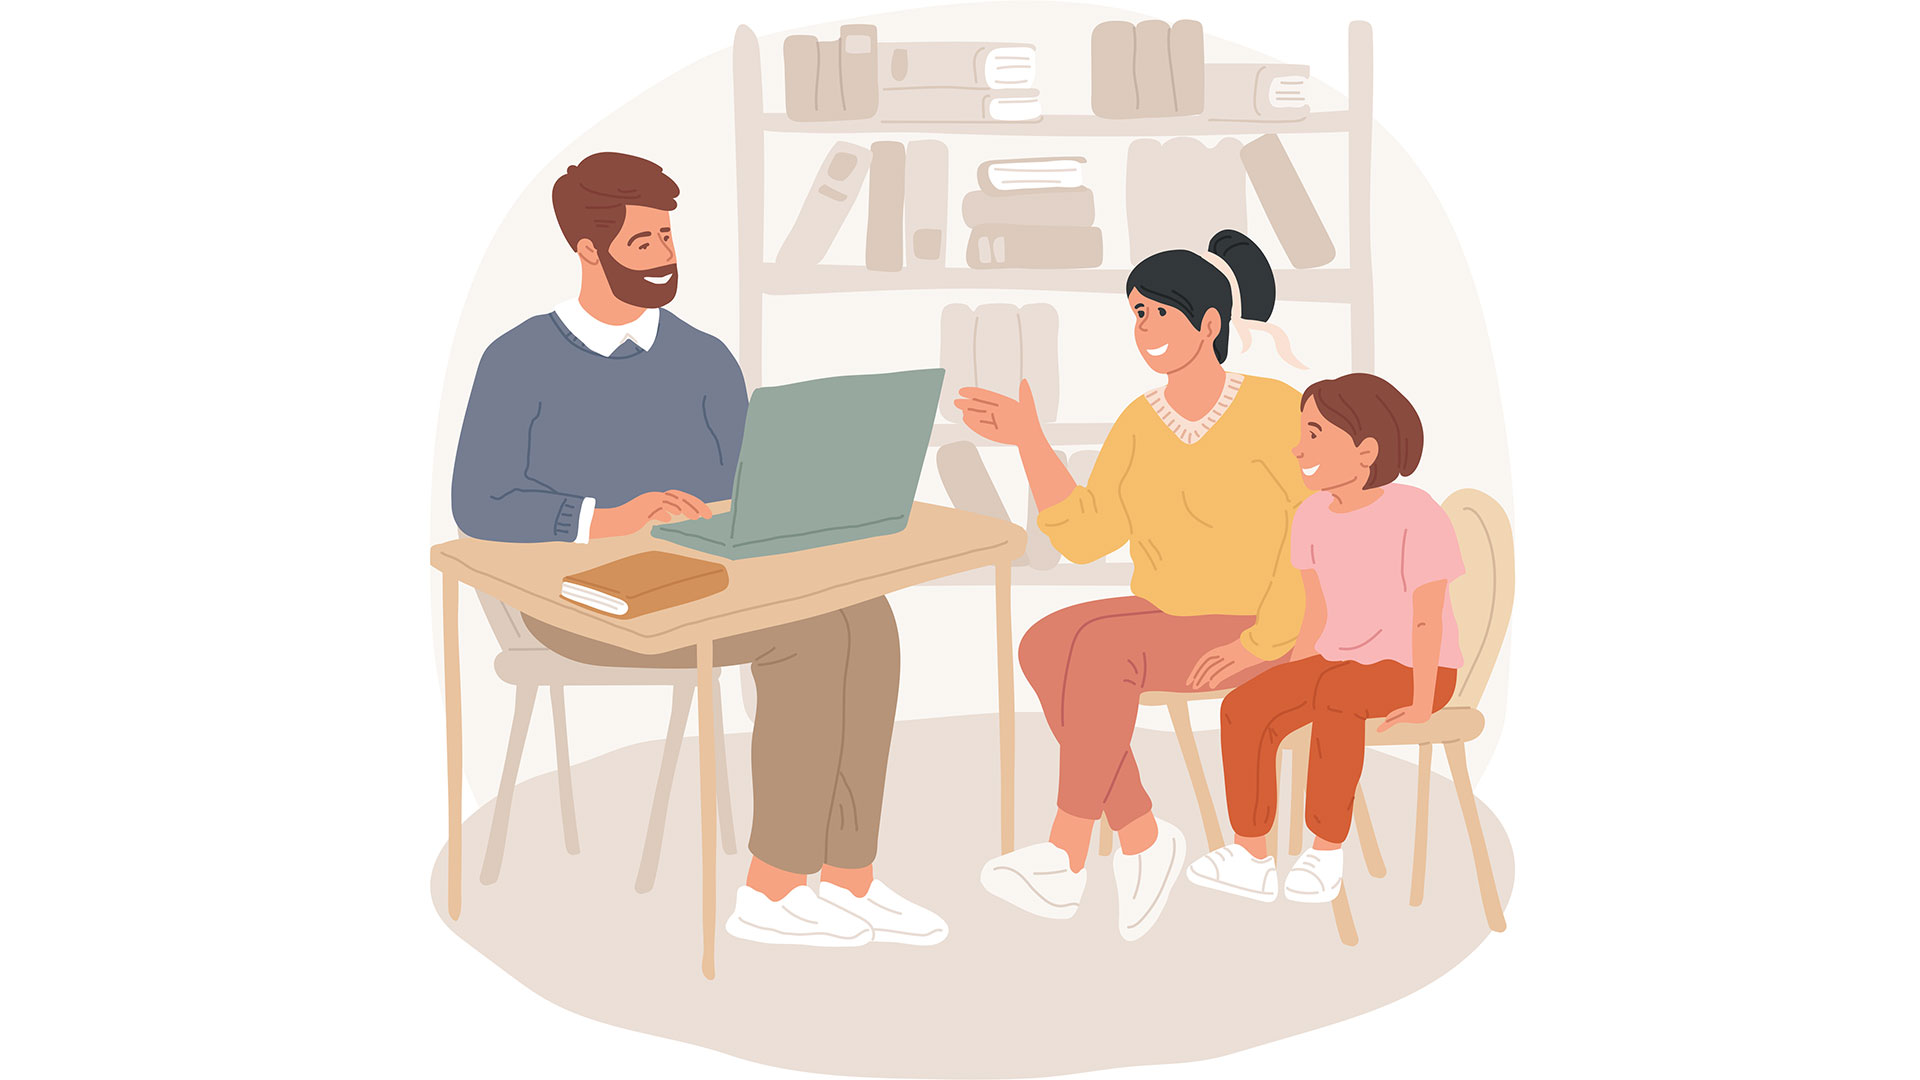 An illustration of a family meeting with a school teacher for an IEP meeting.